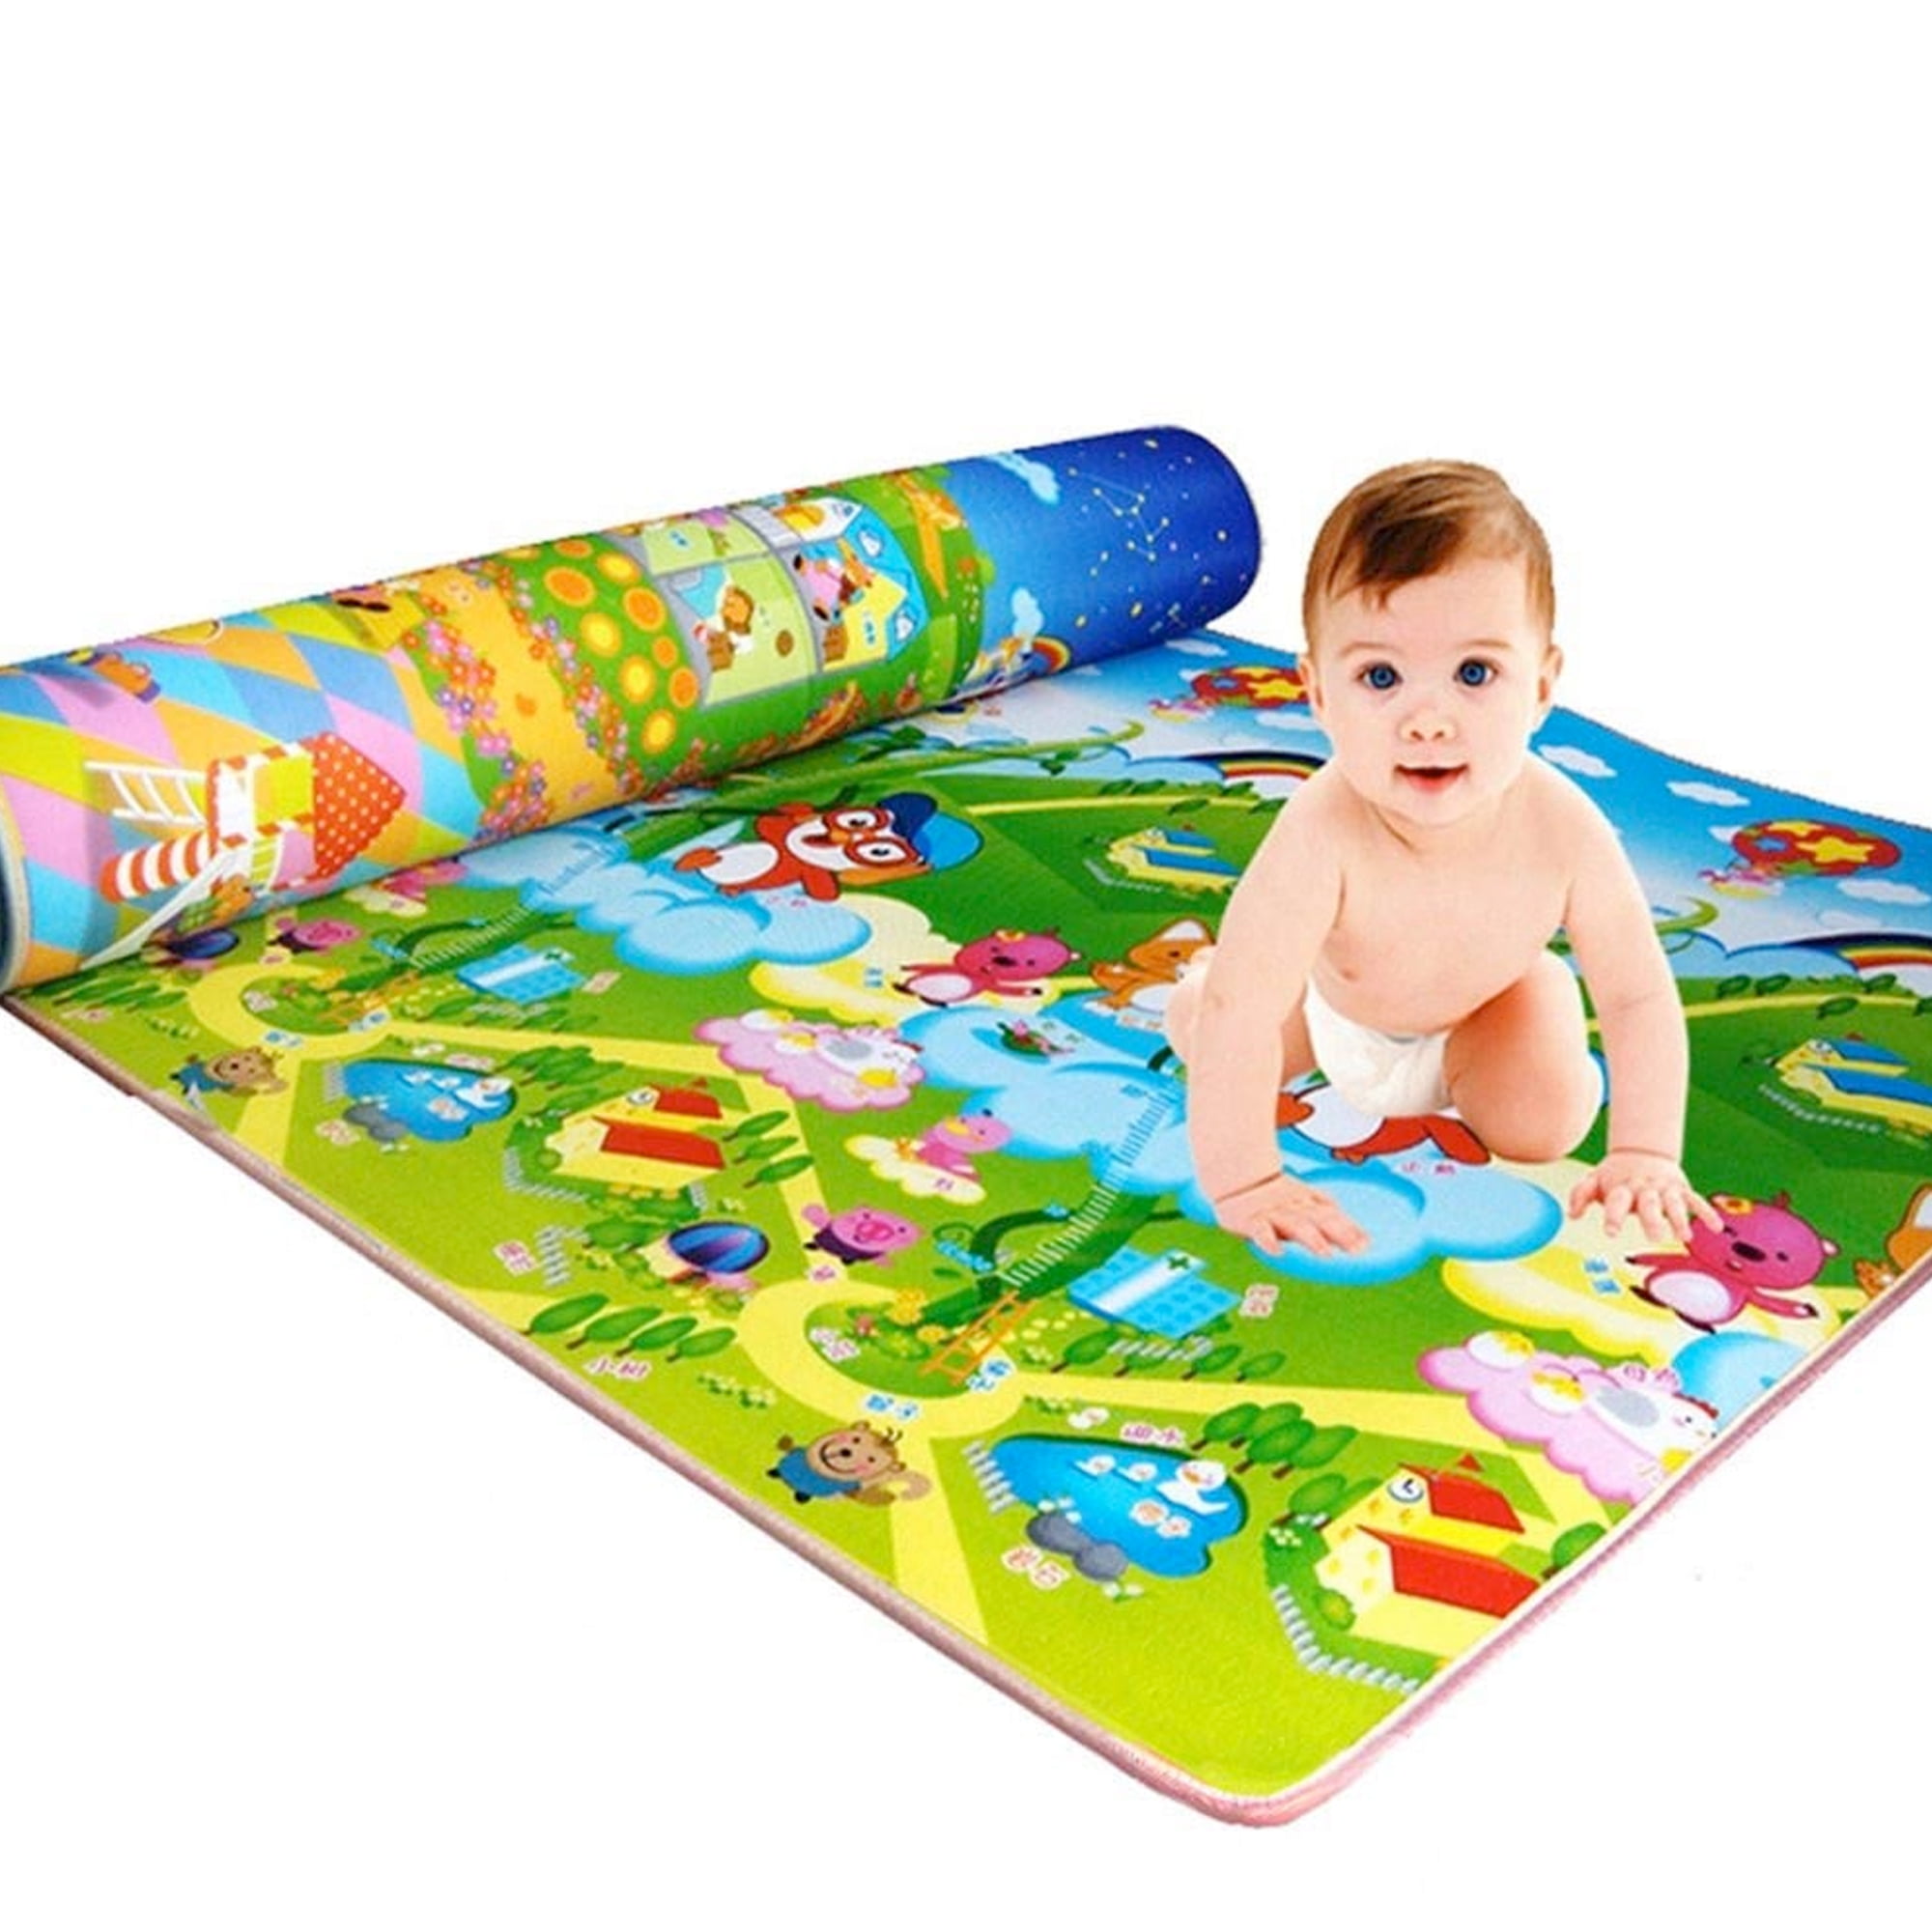 Inex Life Soft Foam Baby Play Mat (0.4 inch Thick) , Perfect Playmat for Tummy Time & Crawling - Thick Padded Tiles Protect Infants & Toddlers from